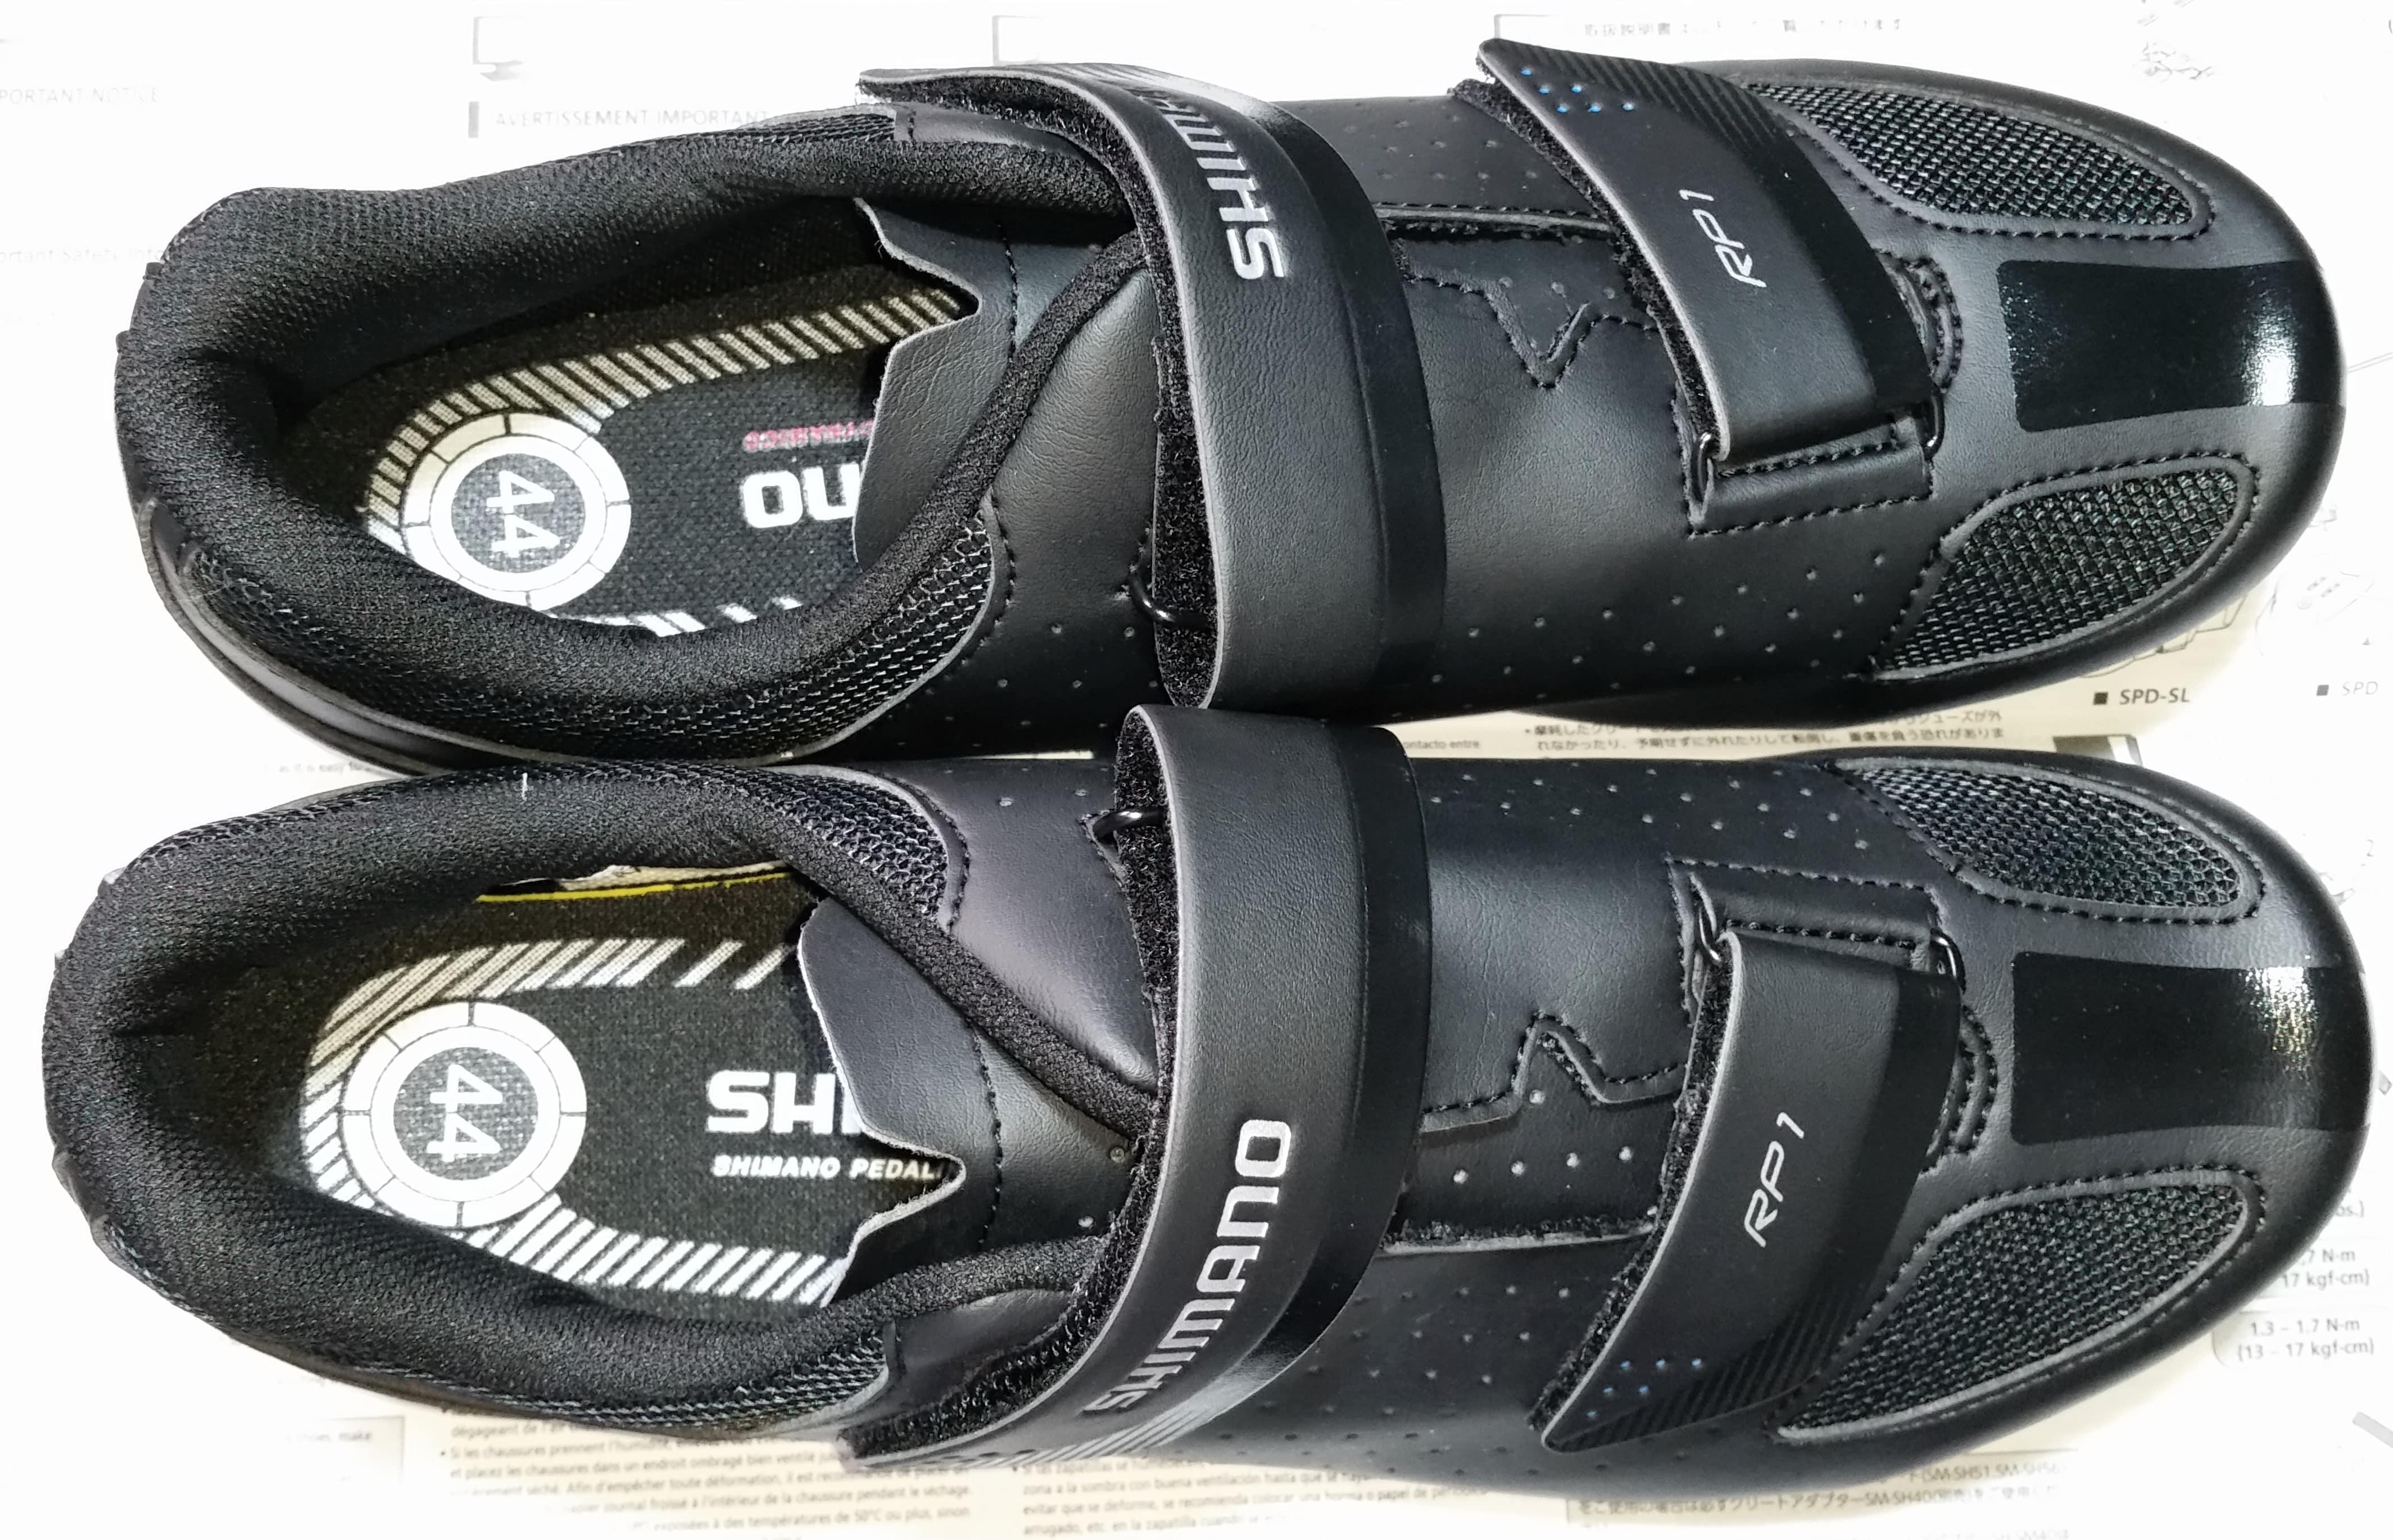 67 Sports Cycling shoes price philippines for Mens